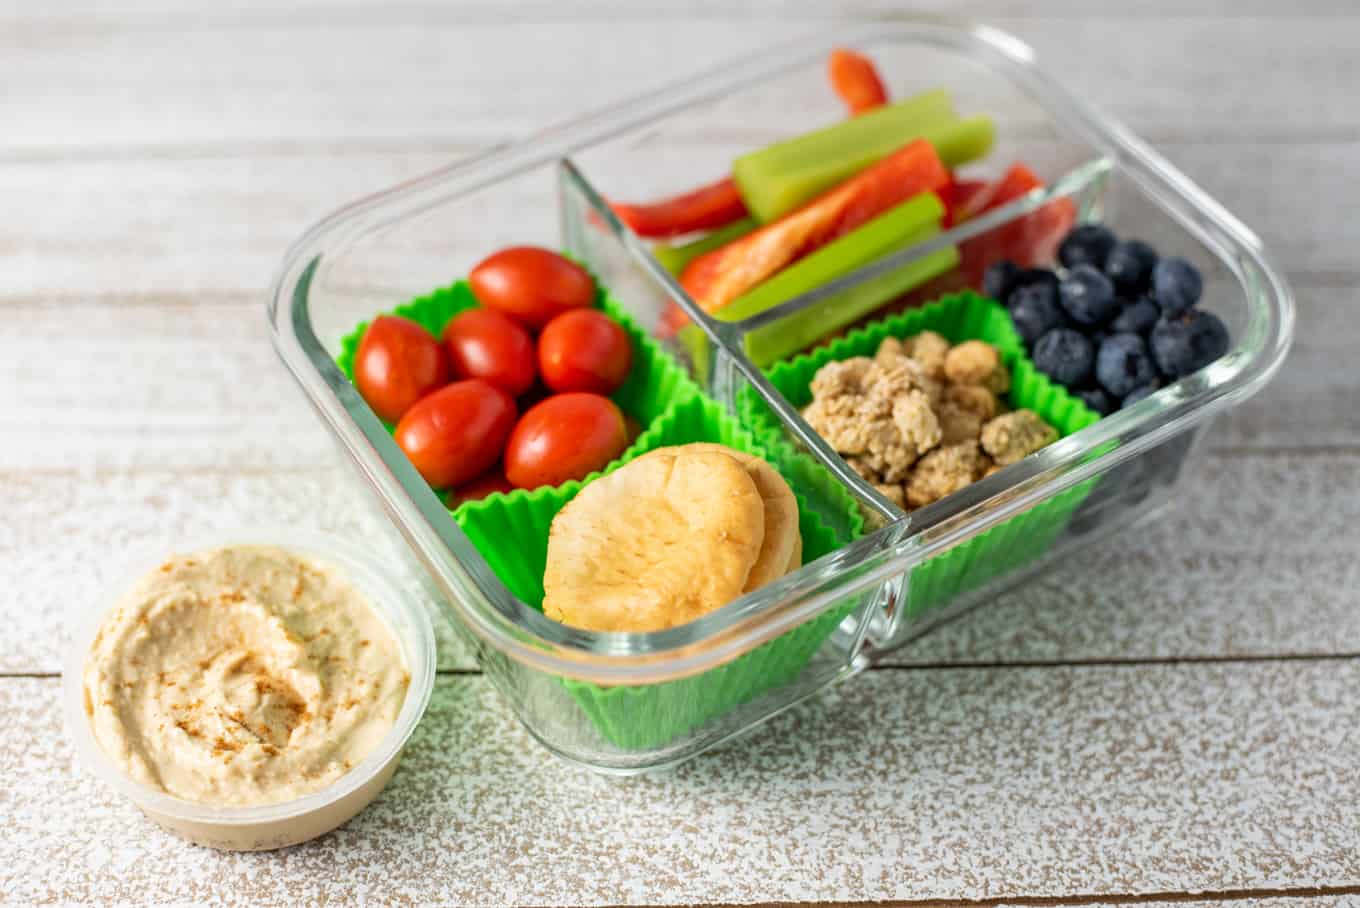 A glass bento box container of crackers, veggie sticks, blueberries, granola, and hummus.